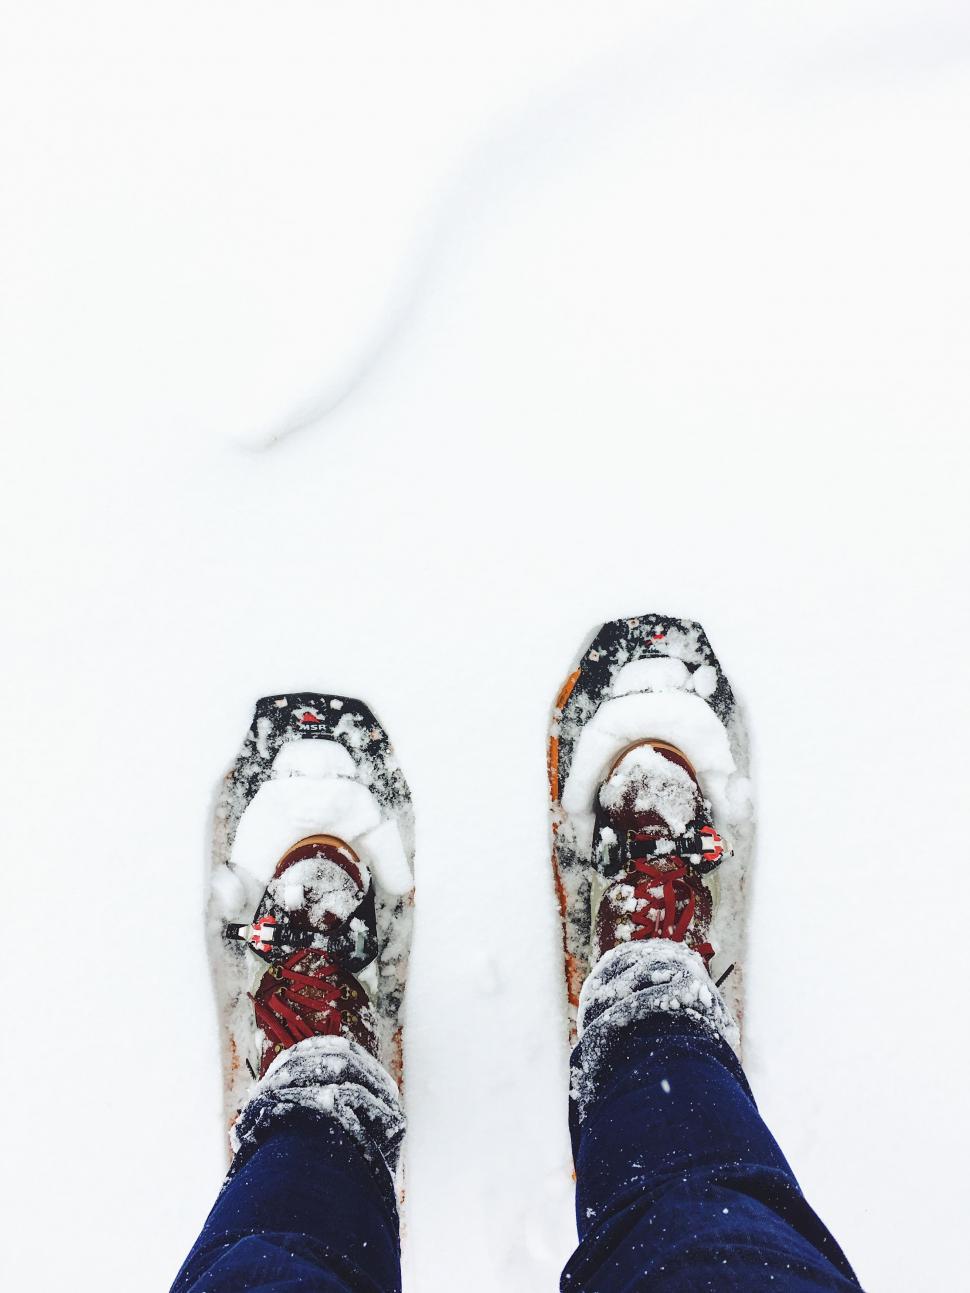 Free Image of Person Standing in Snow With Feet Submerged 